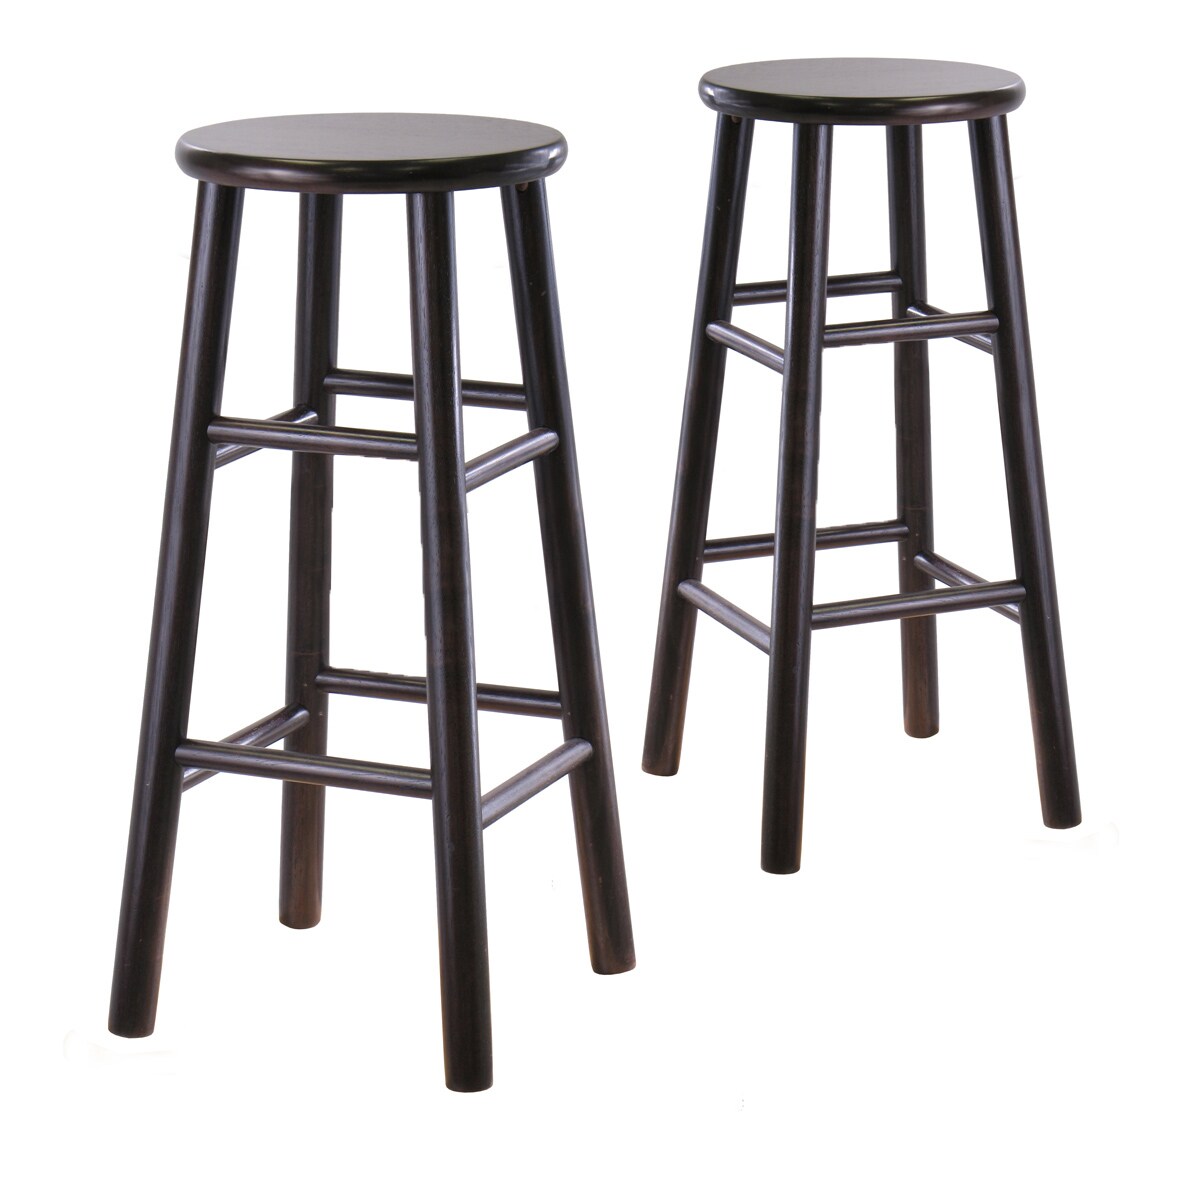 Swivel Bar Kitchen Counter Stools Solid Wood Dark Espresso Winsome Set of 2 